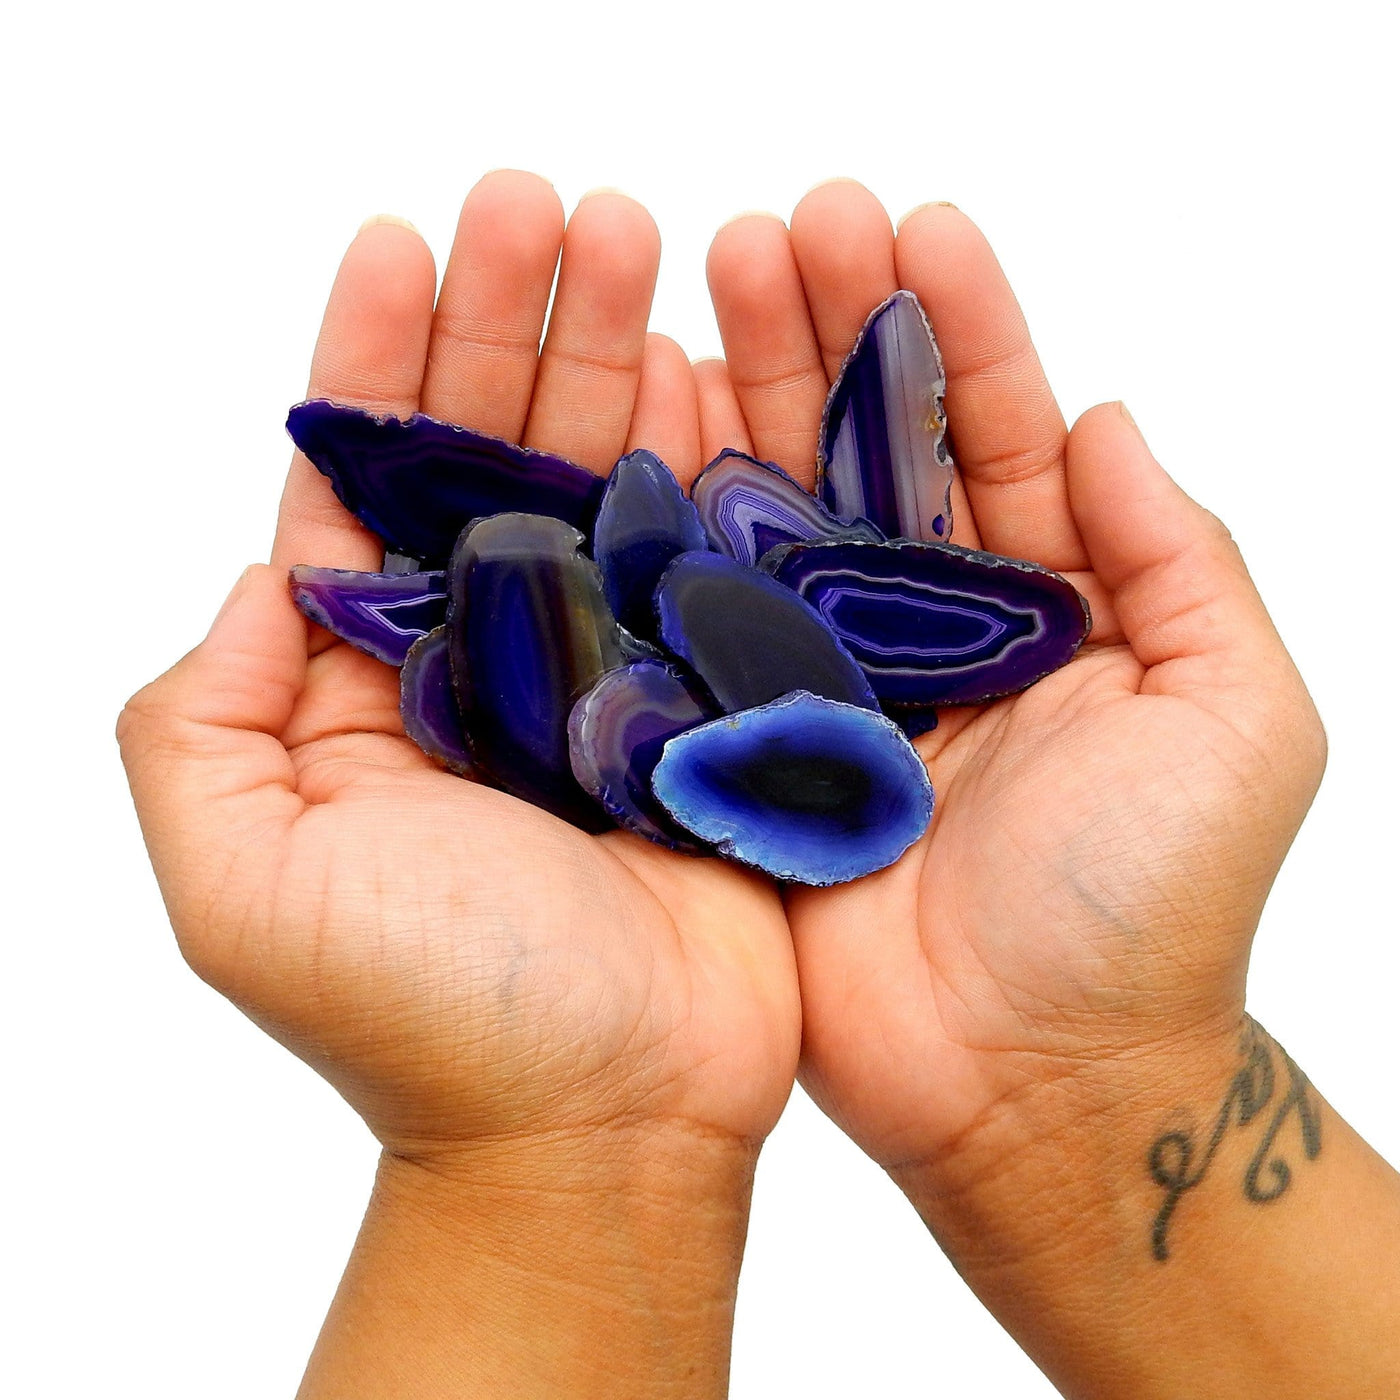 This Picture is Showing Purple agate slices in hands for size reference and display.